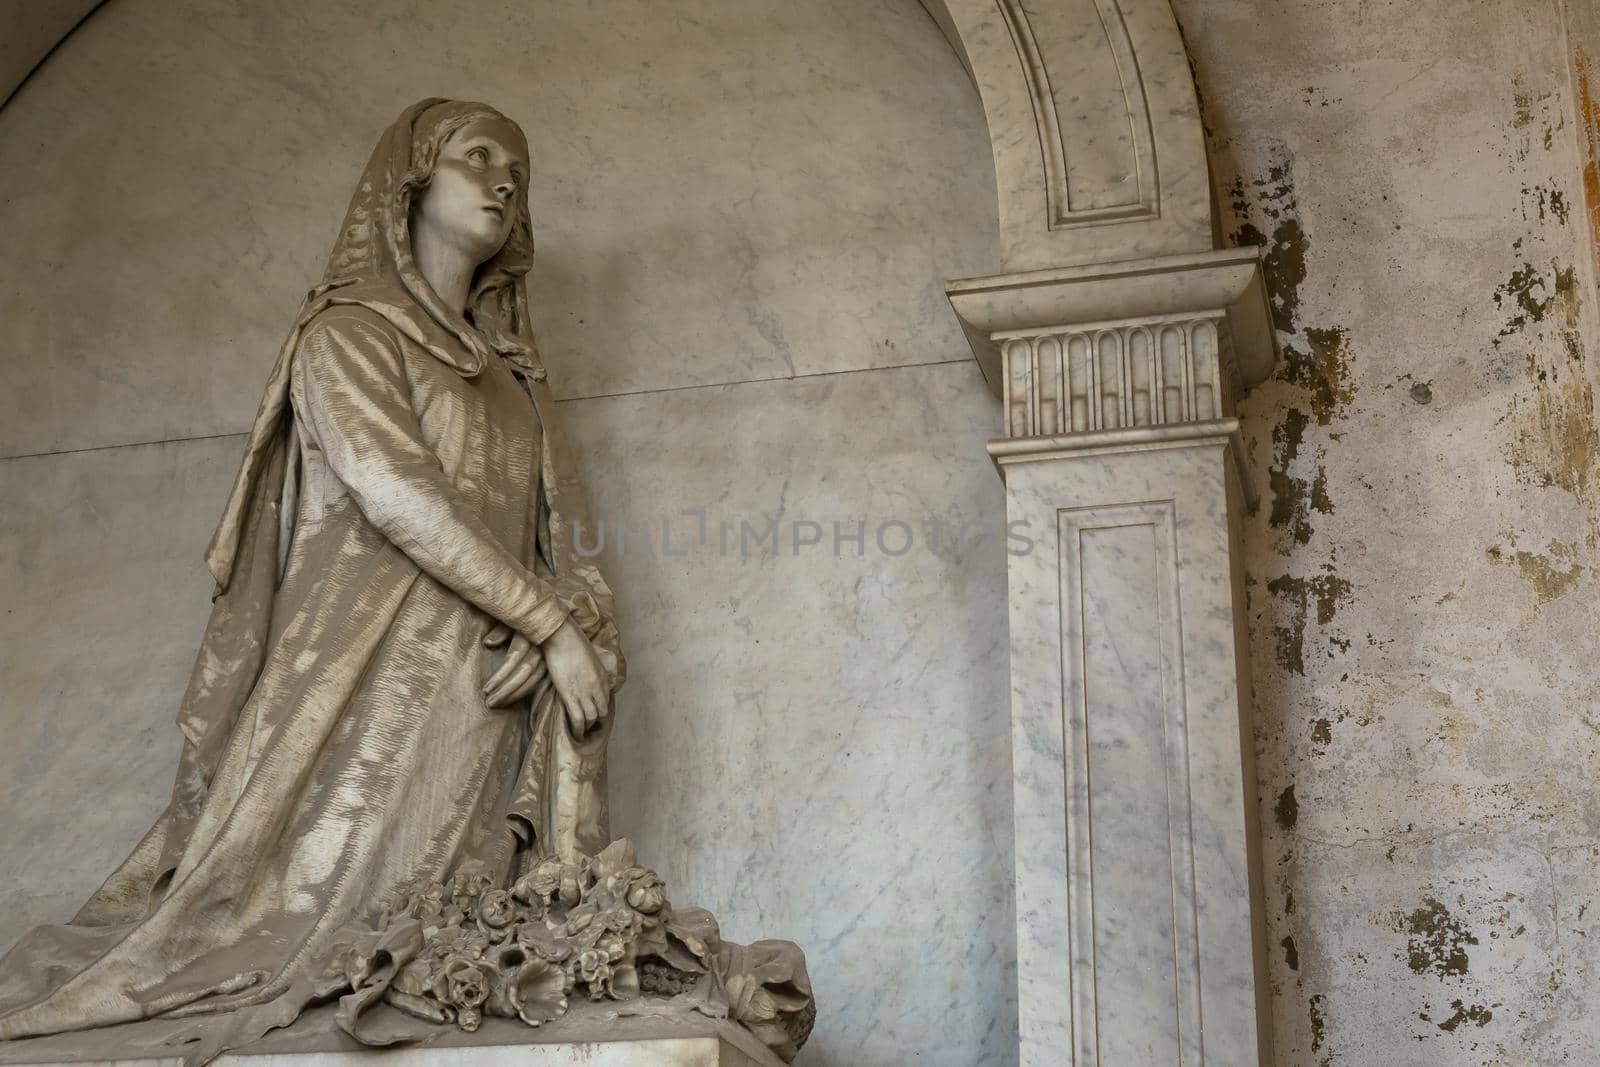 GENOA, ITALY - June 2020: antique statue, beginning 1800, made of marble, in a Christian Catholic cemetery - Italy